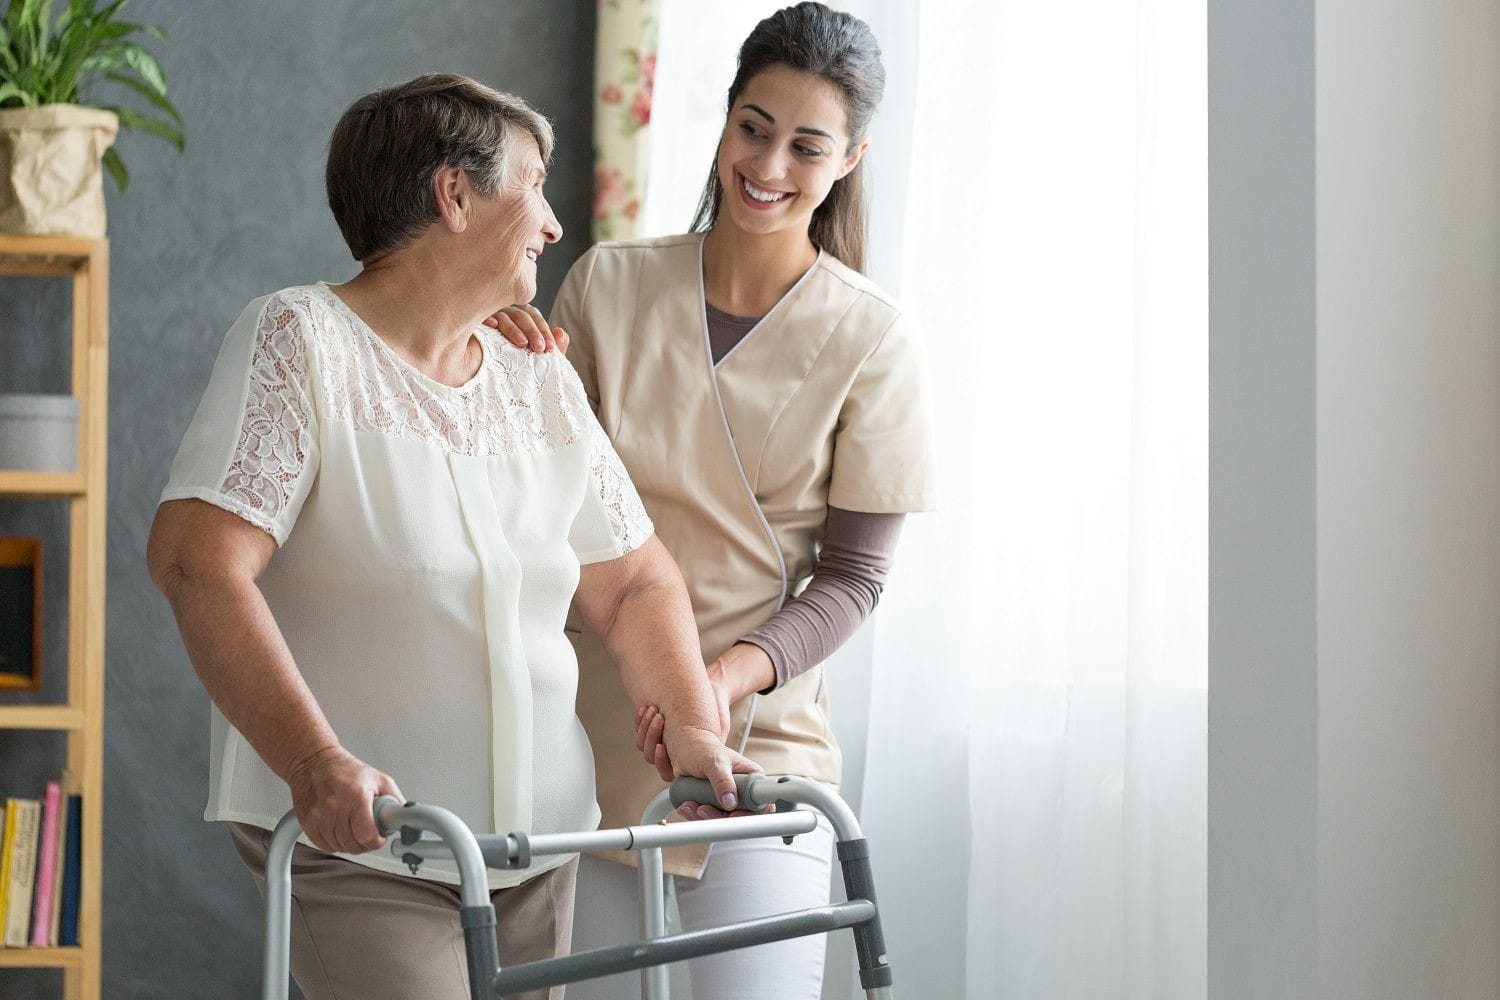 Home care support and services